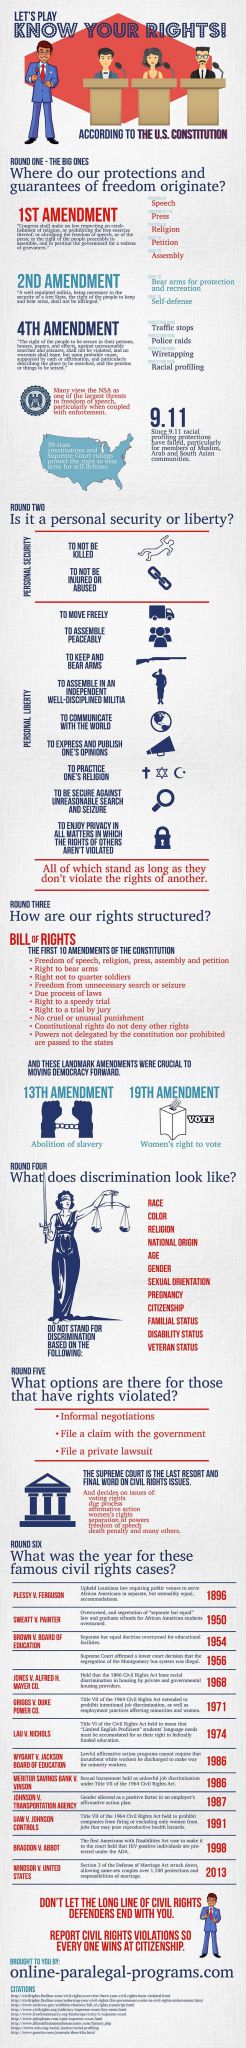 Bill Of Rights Amendments Worksheet as Well as Constitutional solutions to the Grievances Worksheet Fresh 356 Best